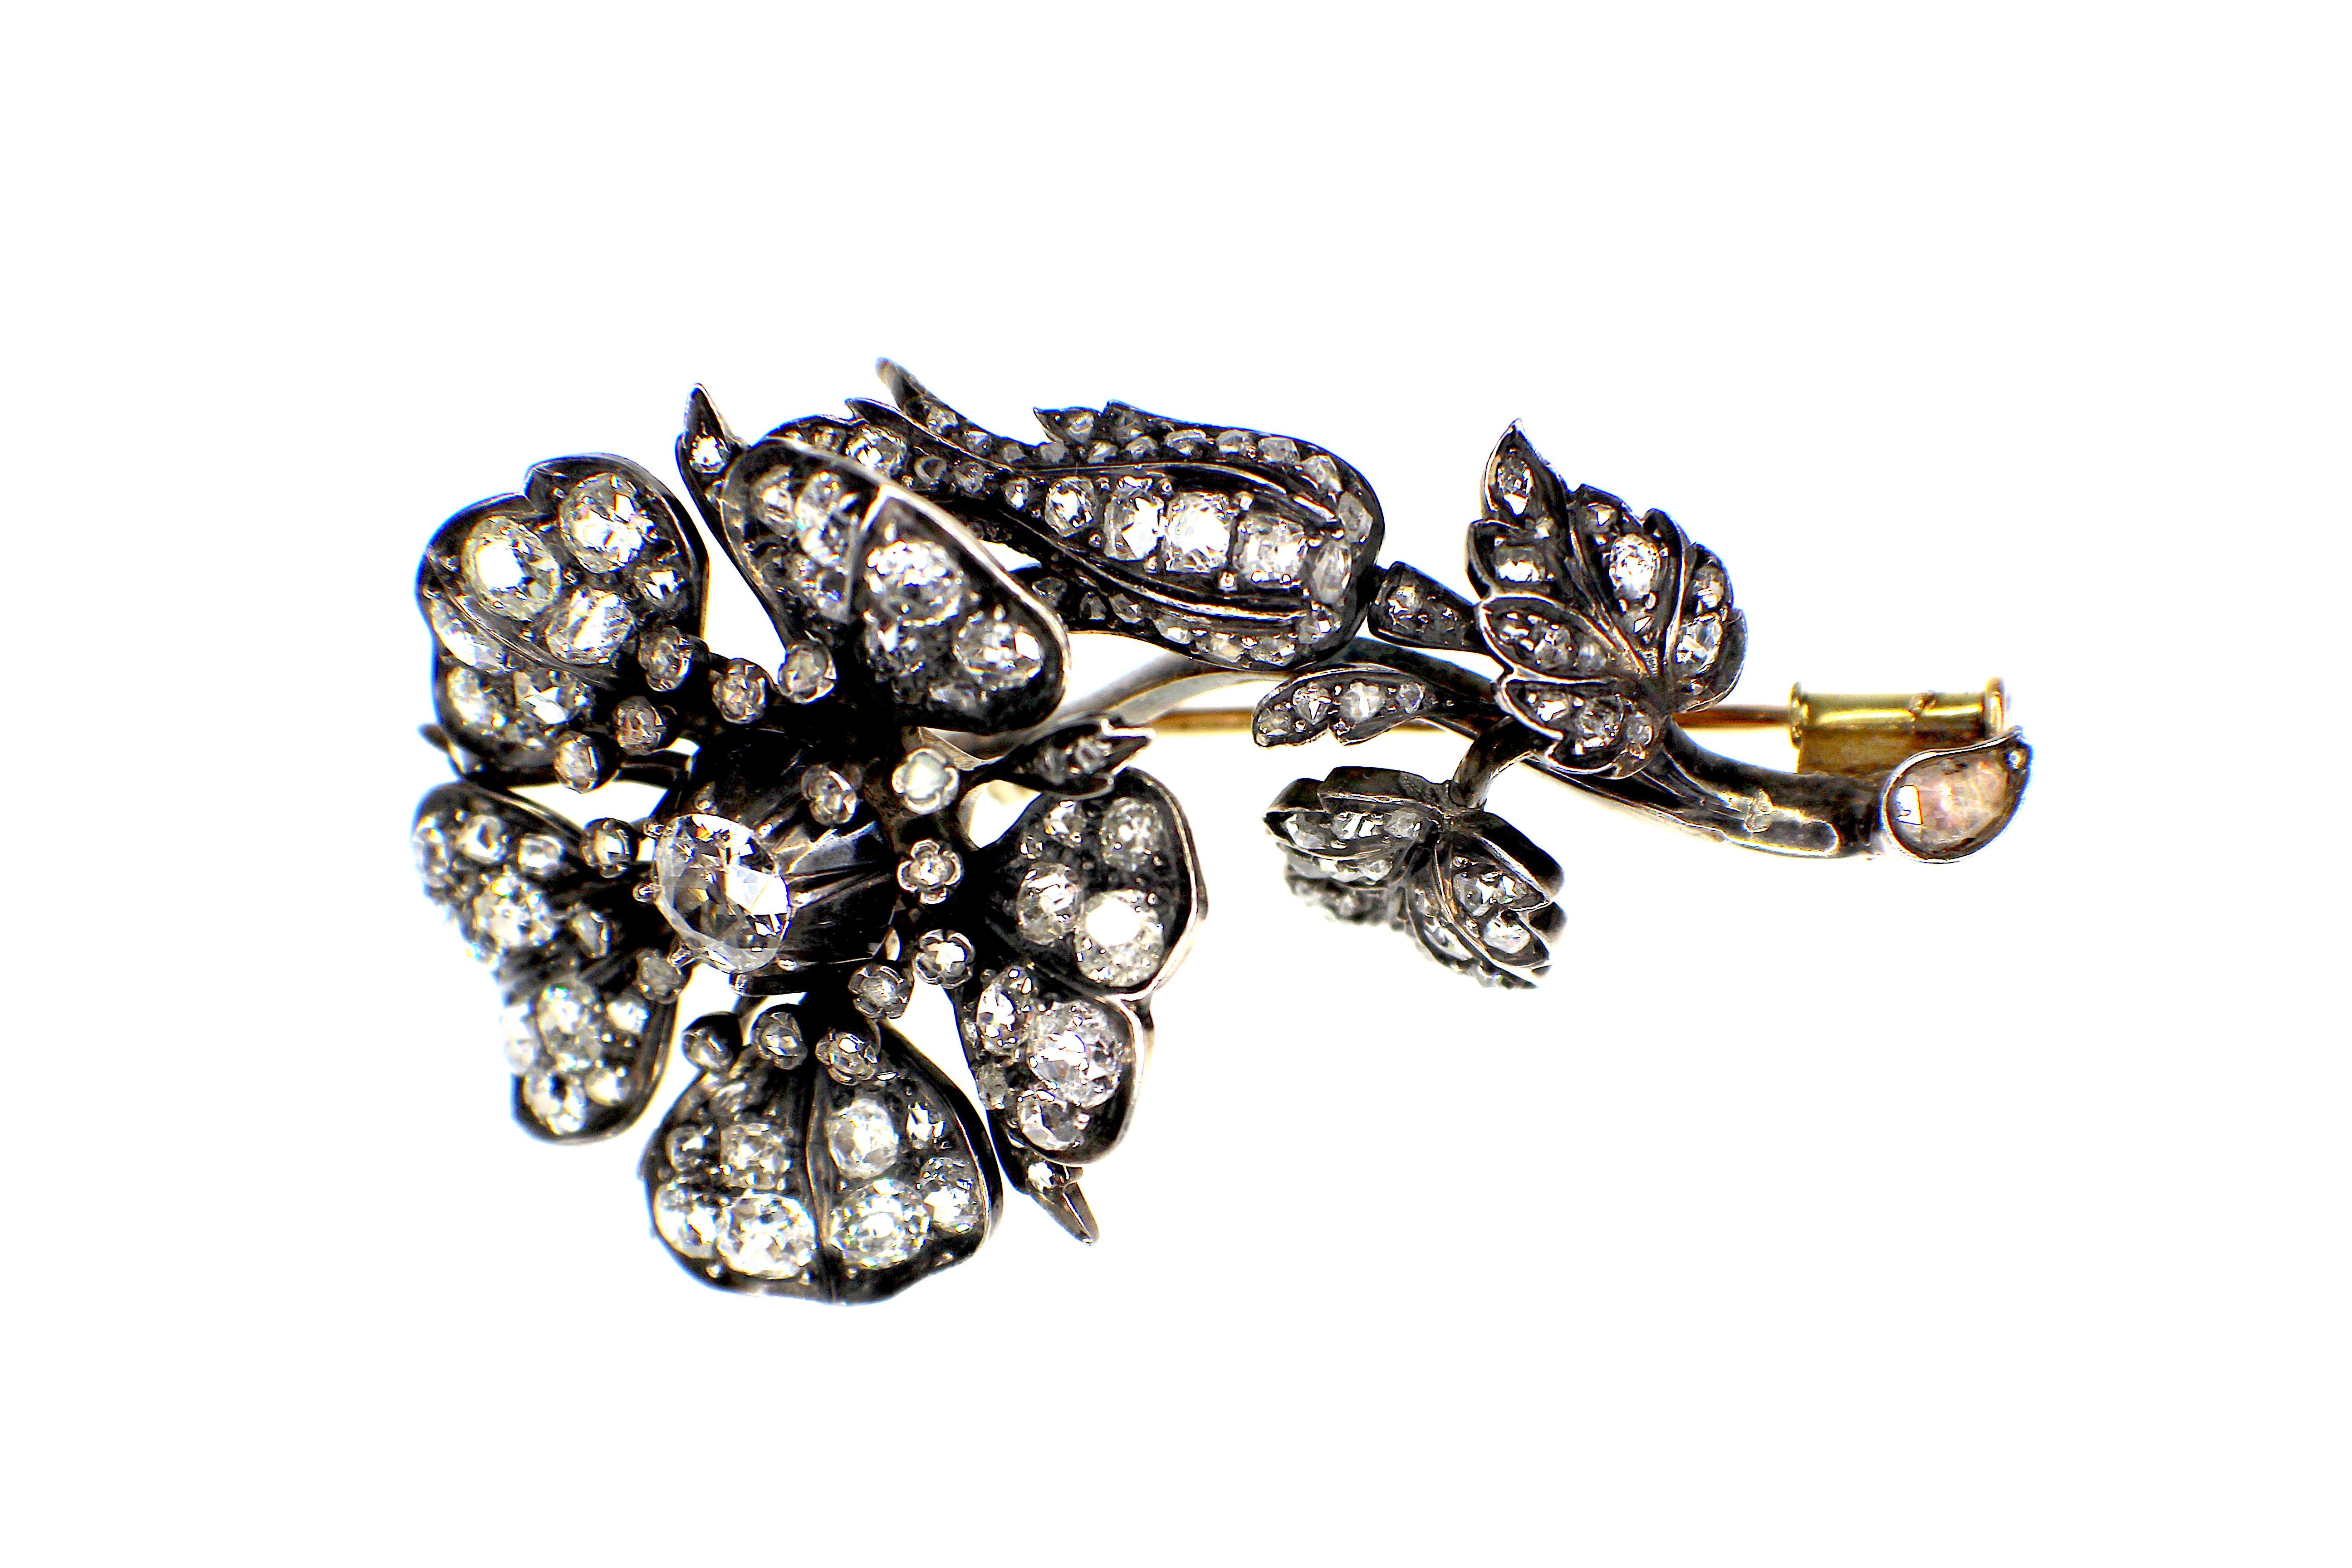 Antique Diamond Brooch, set with old mine, old european and rosé cut diamonds,
 total weight of diamonds  estimated 16ct,  middle flower en tremblant. 